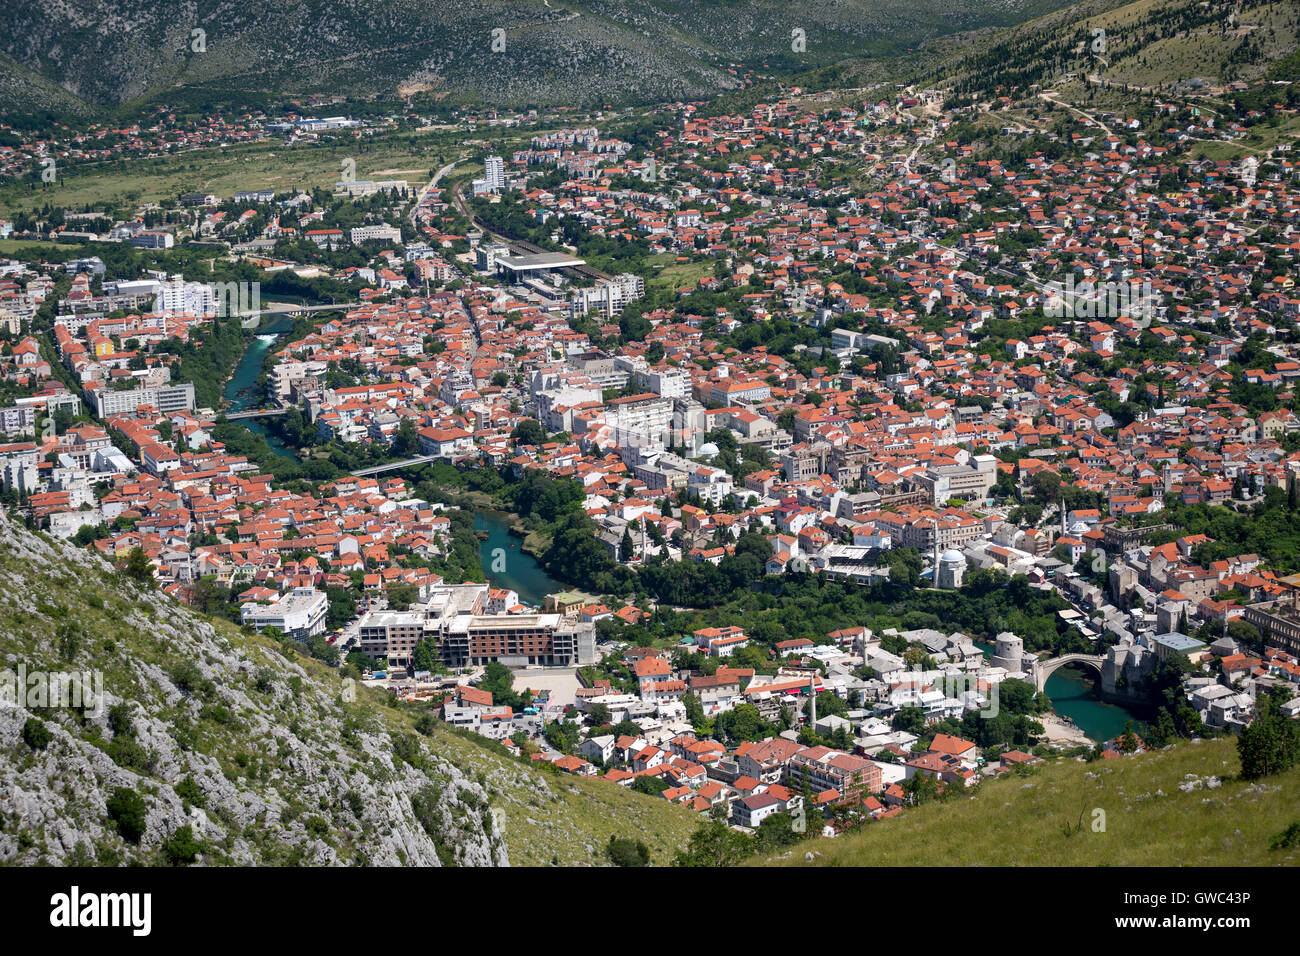 An aerial view of Mostar (Bosnia Herzegovina) cut by the Neretva river with old town of Mostar and old bridge in the foreground. Stock Photo